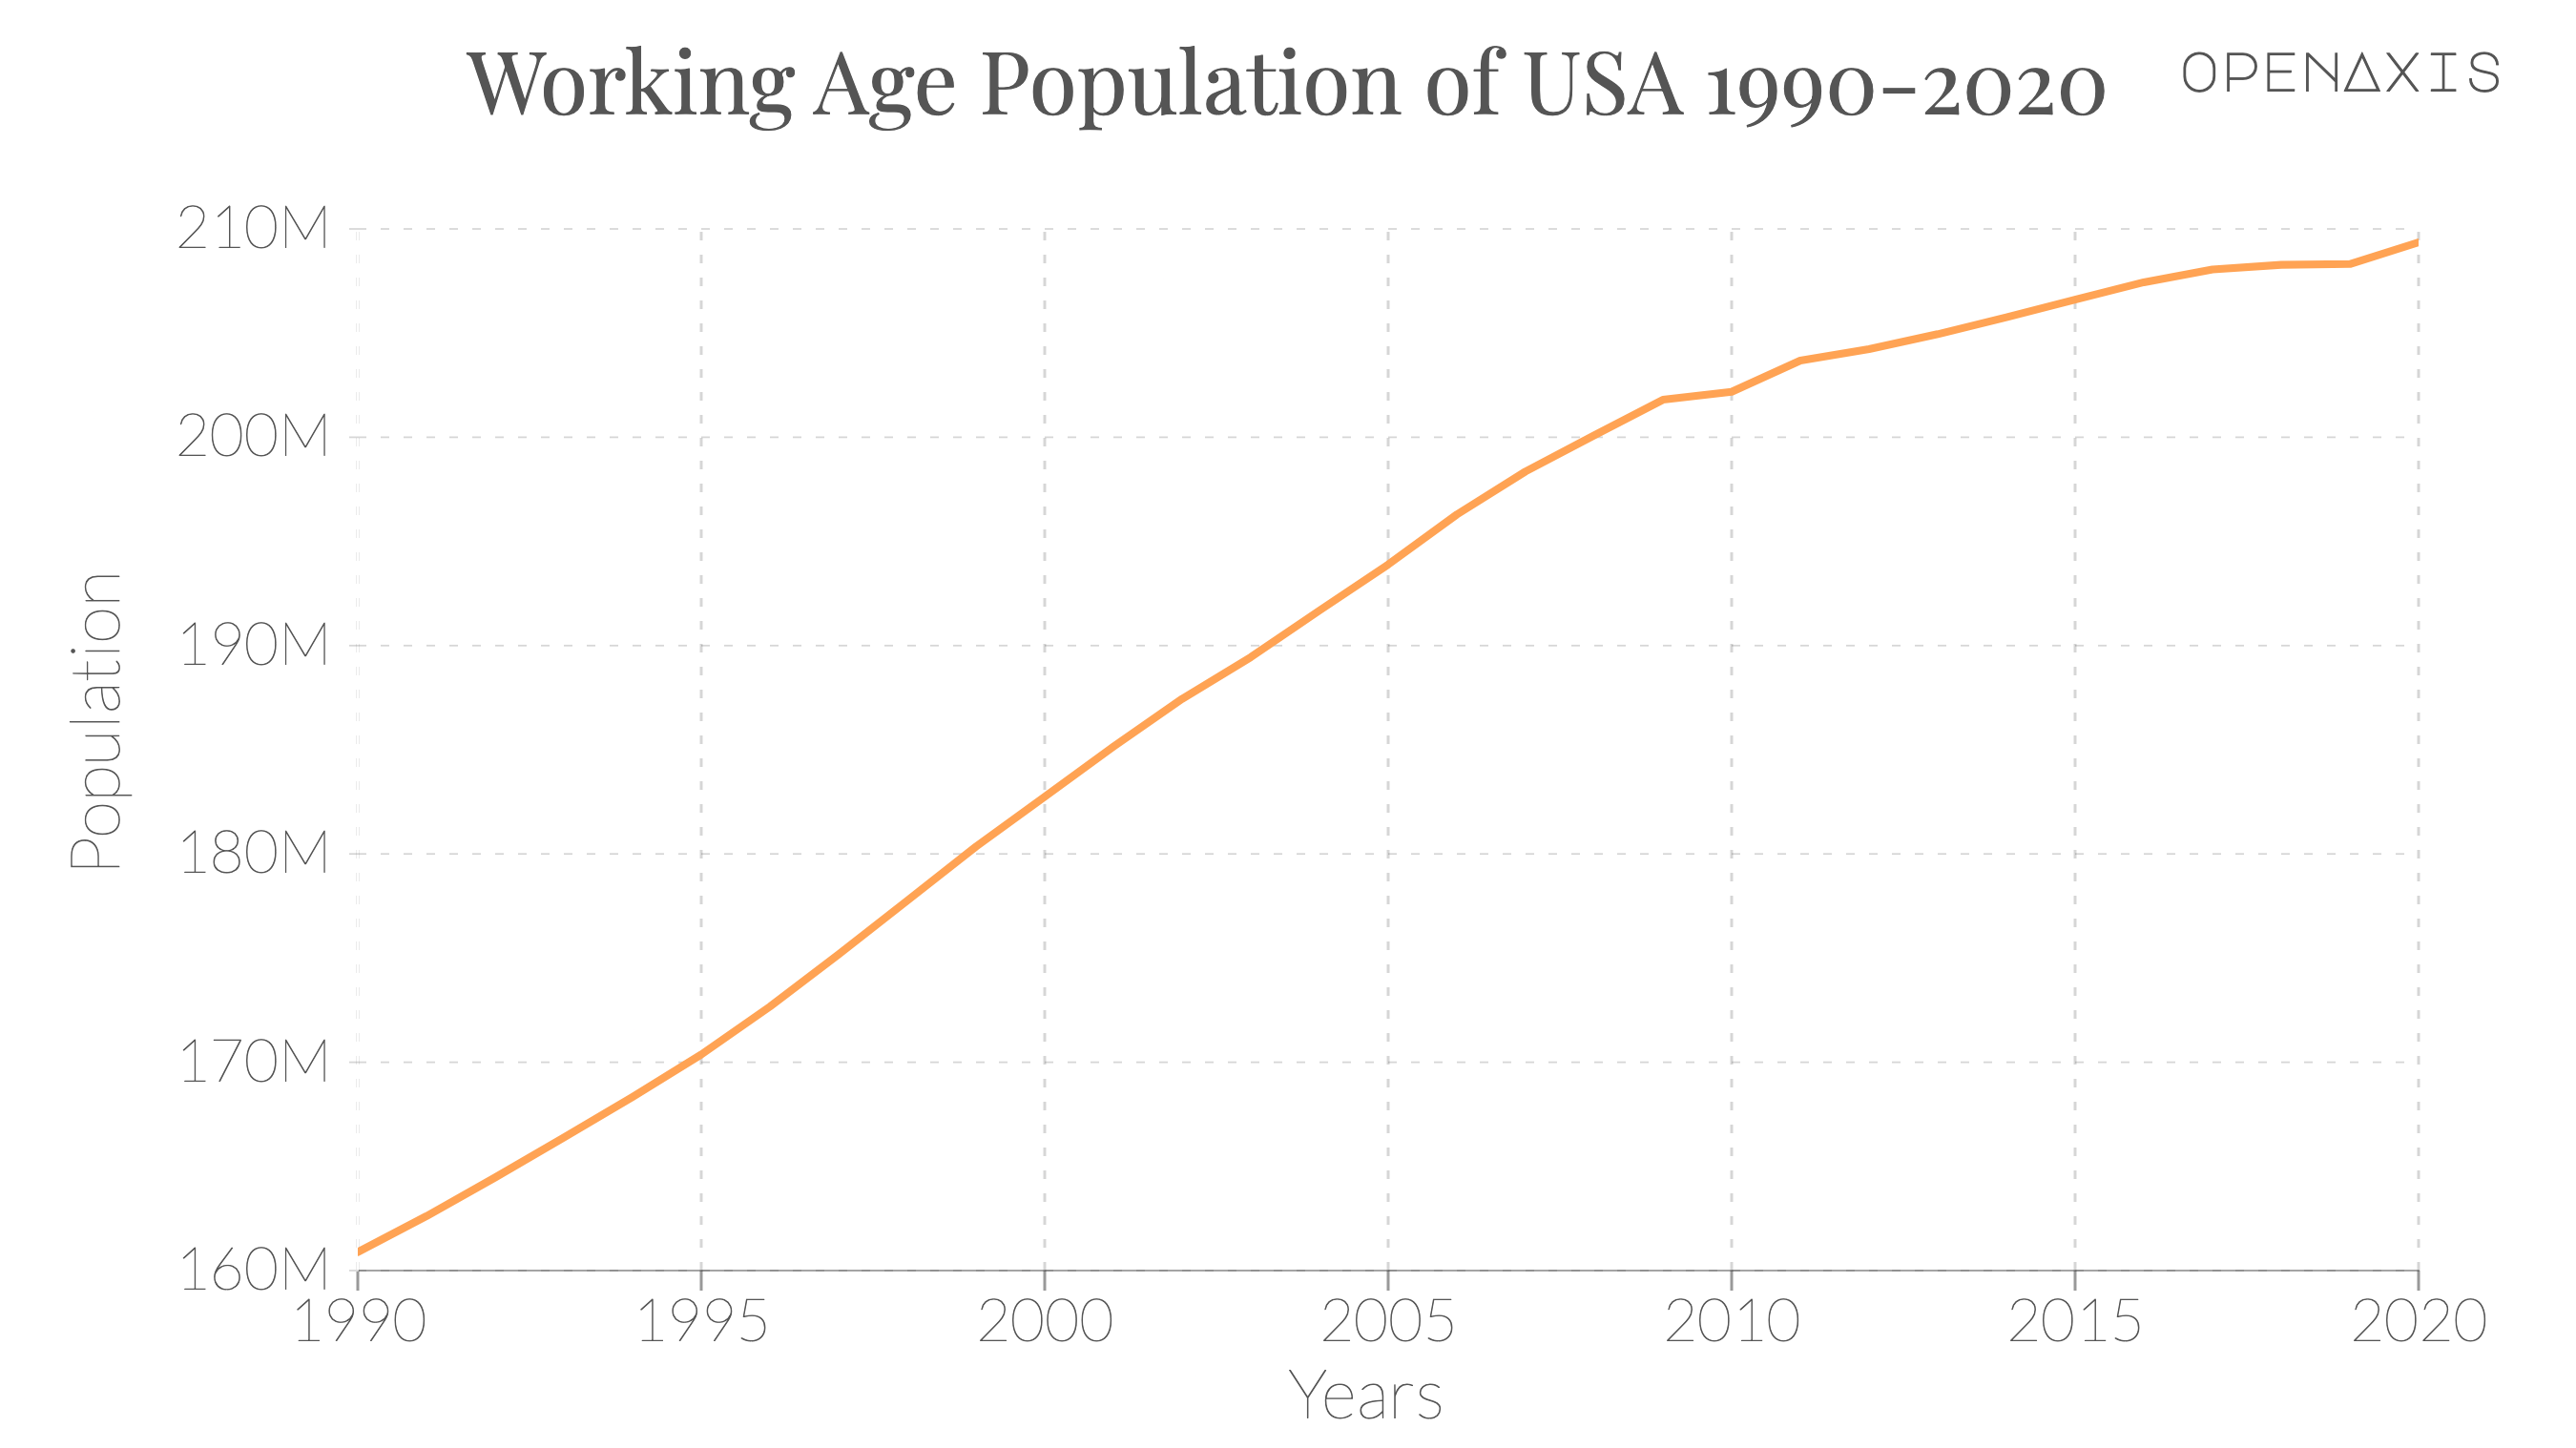 "Working Age Population of USA 1990-2020"